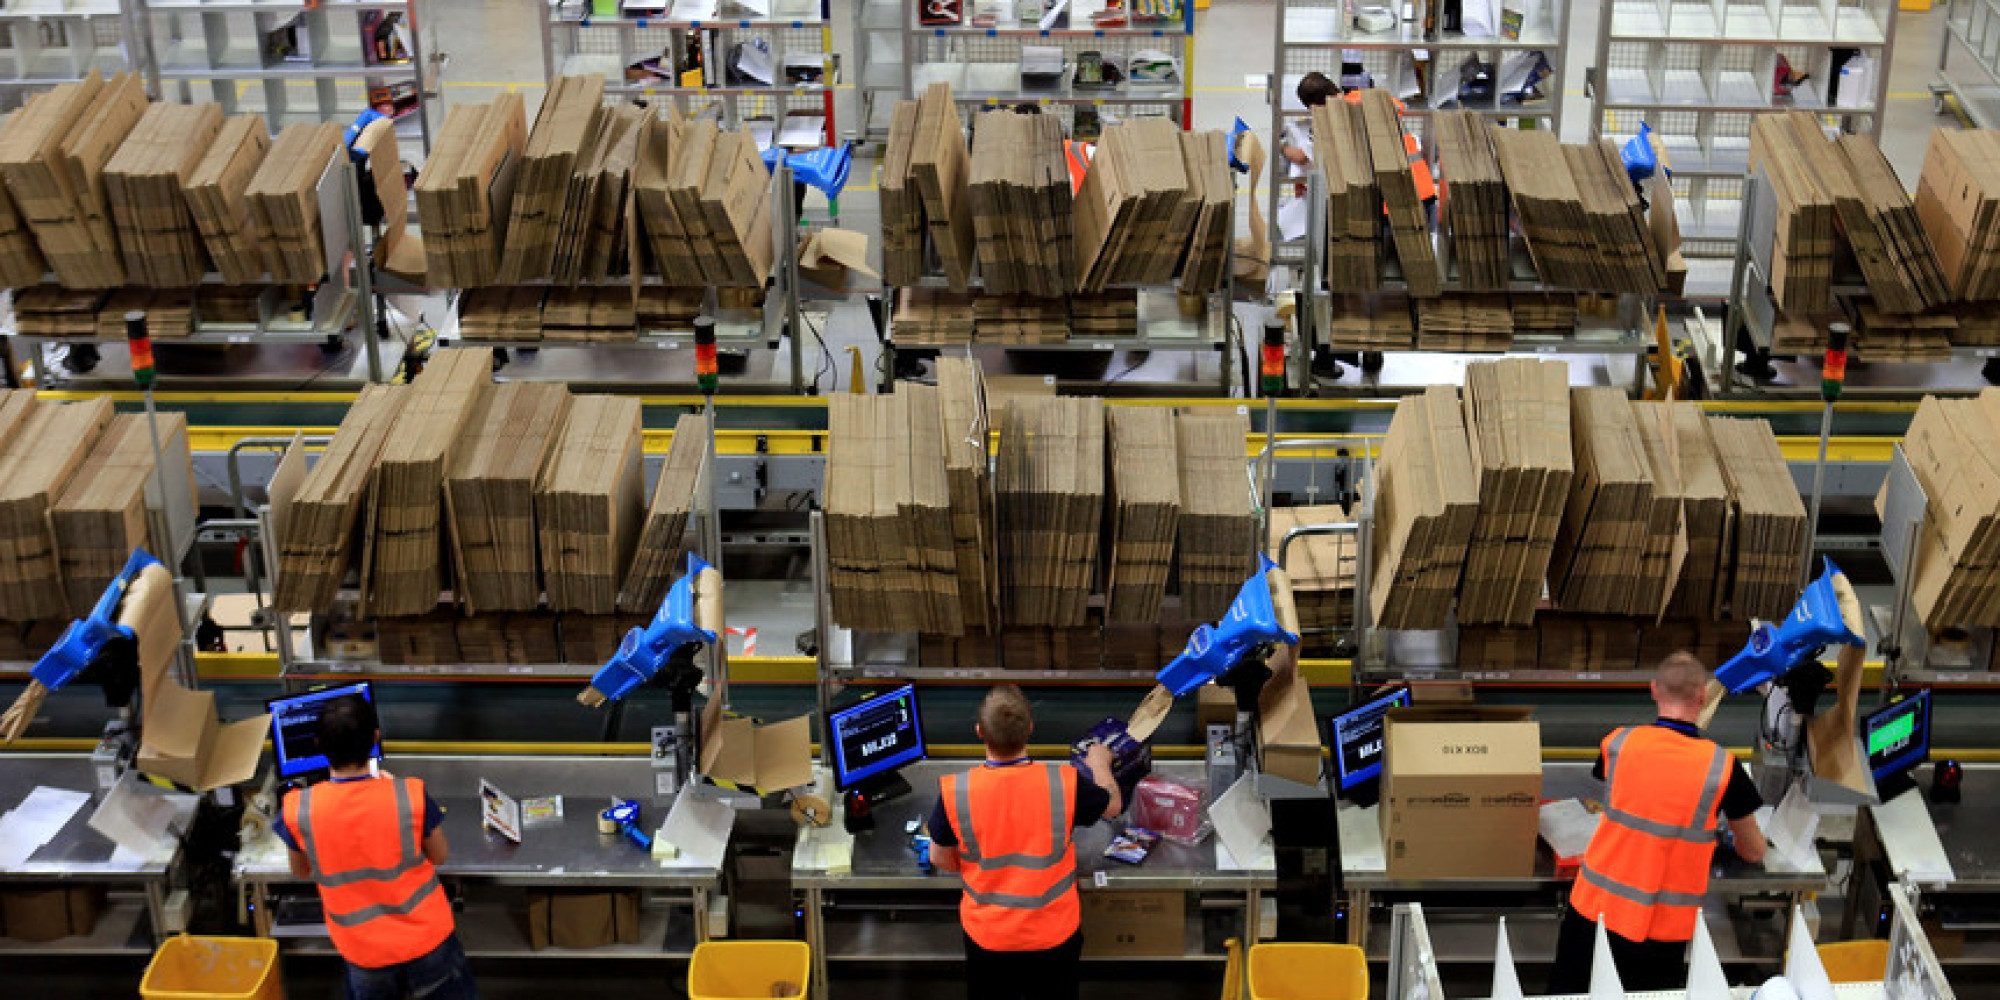 Amazon Warehouse Workers Face 'Increased Risk Of Mental